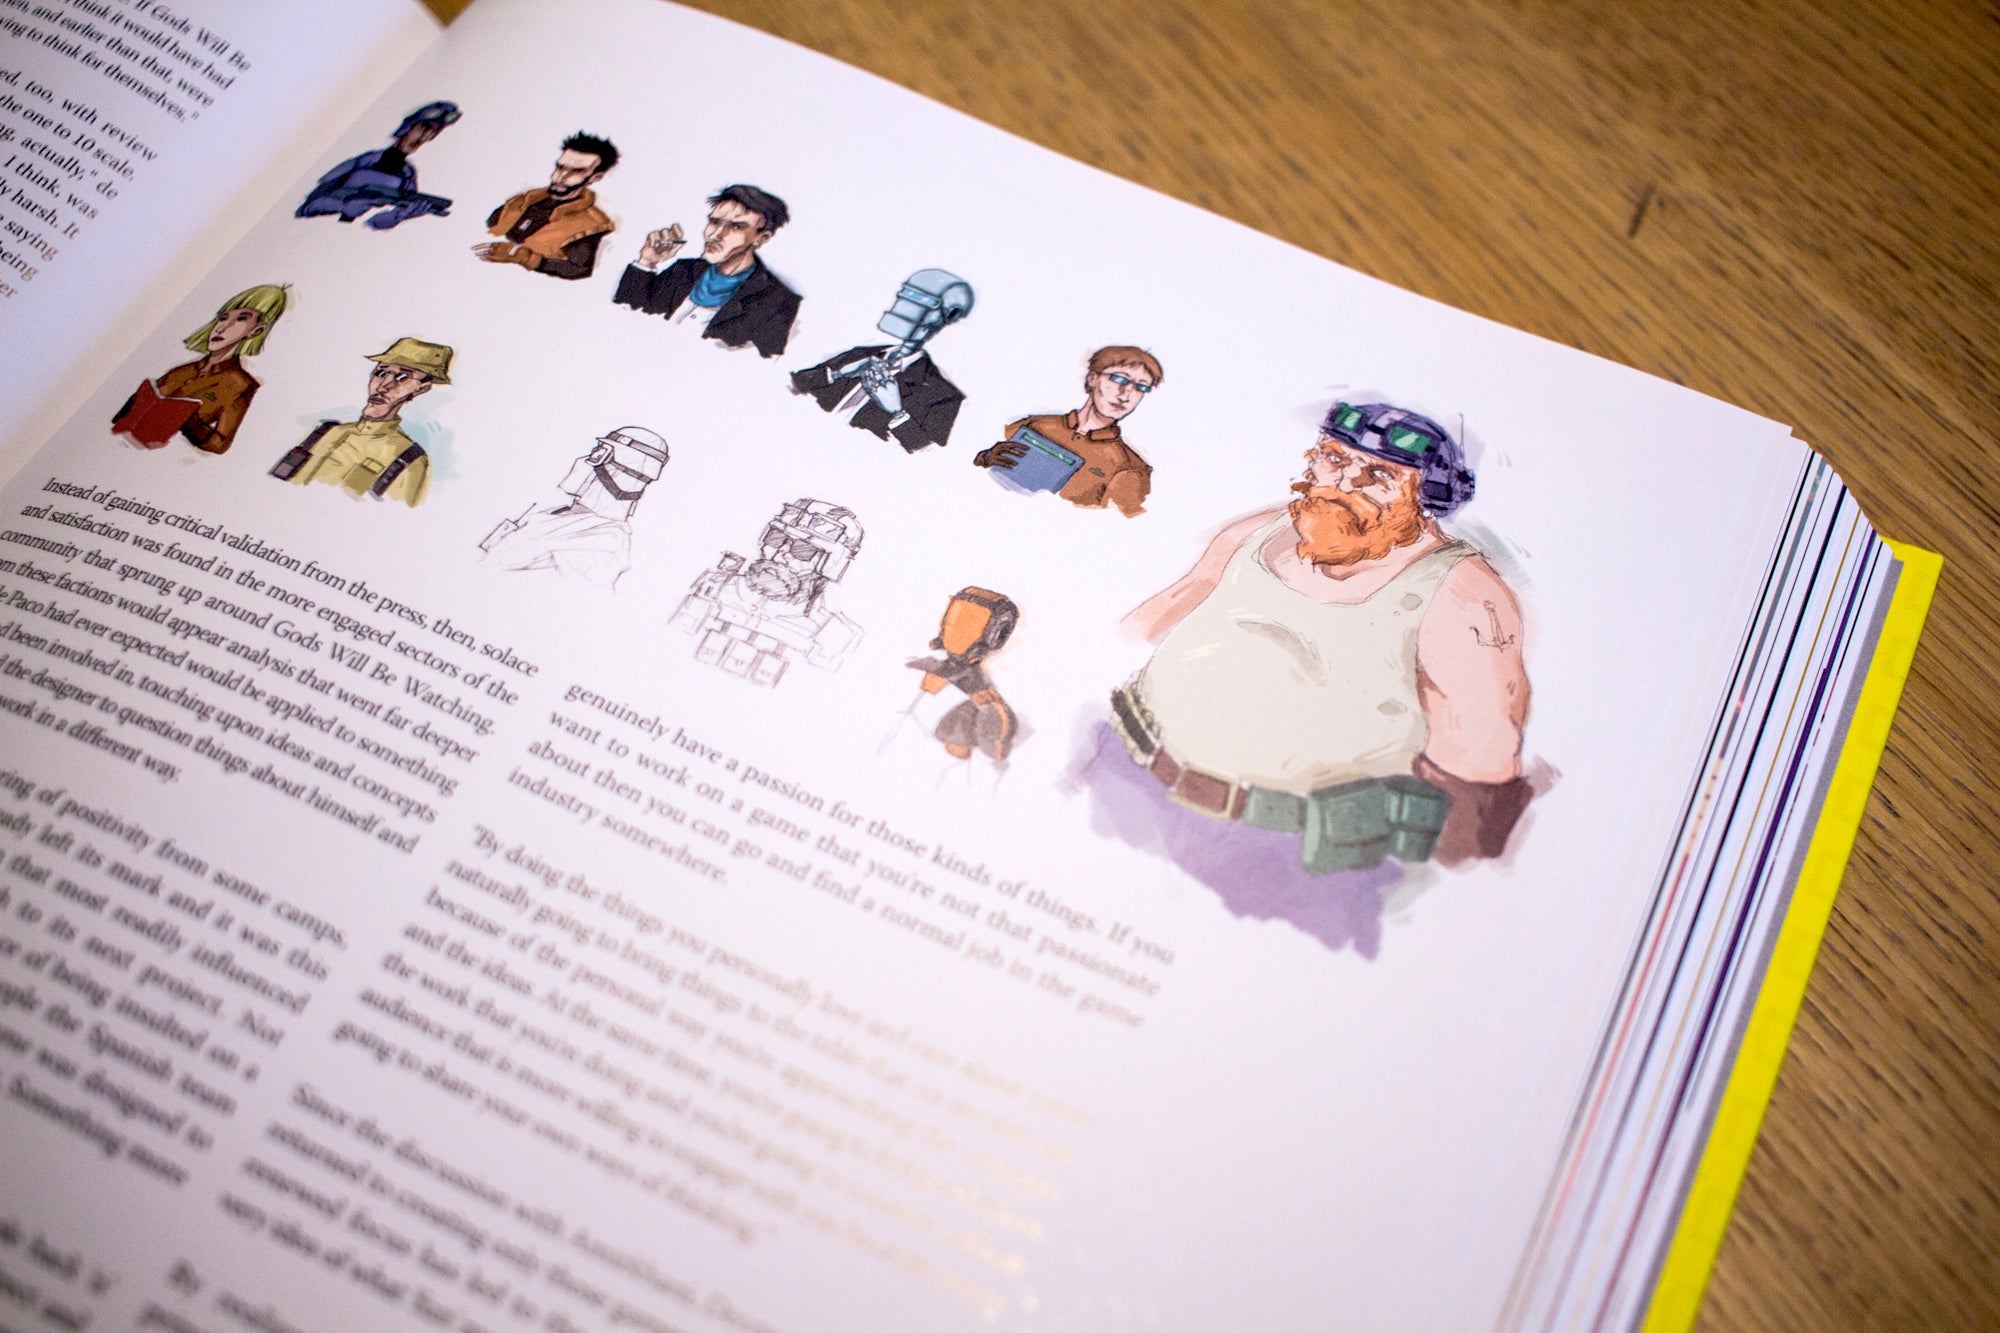 Independent By Design: Art & Stories of Indie Game Creation - Signed Edition